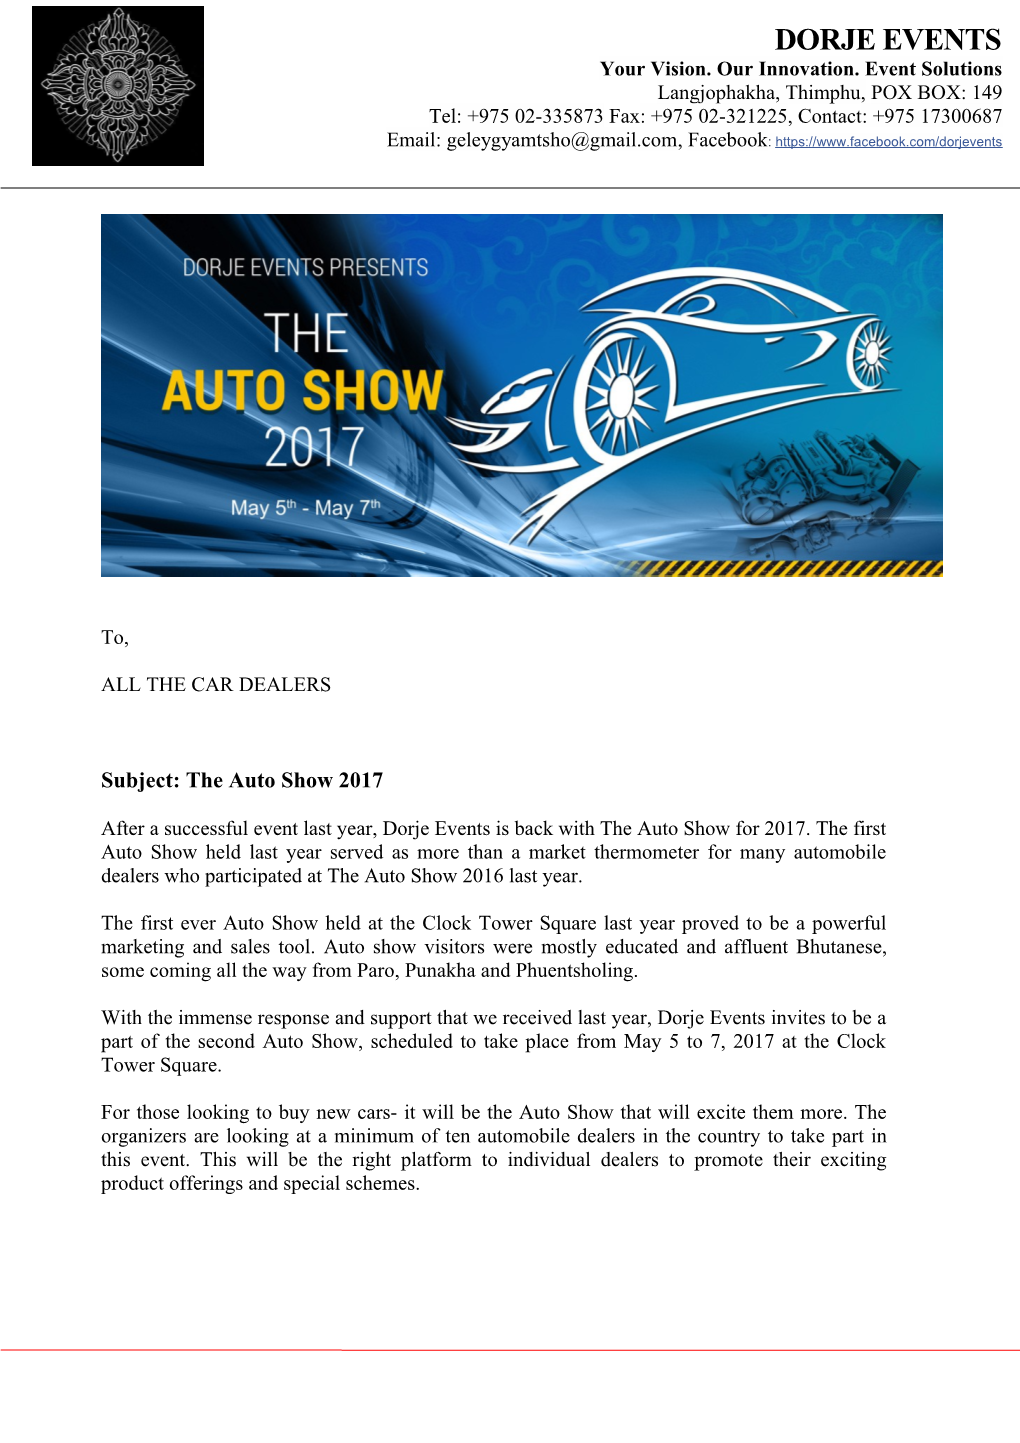 Subject: the Auto Show 2017